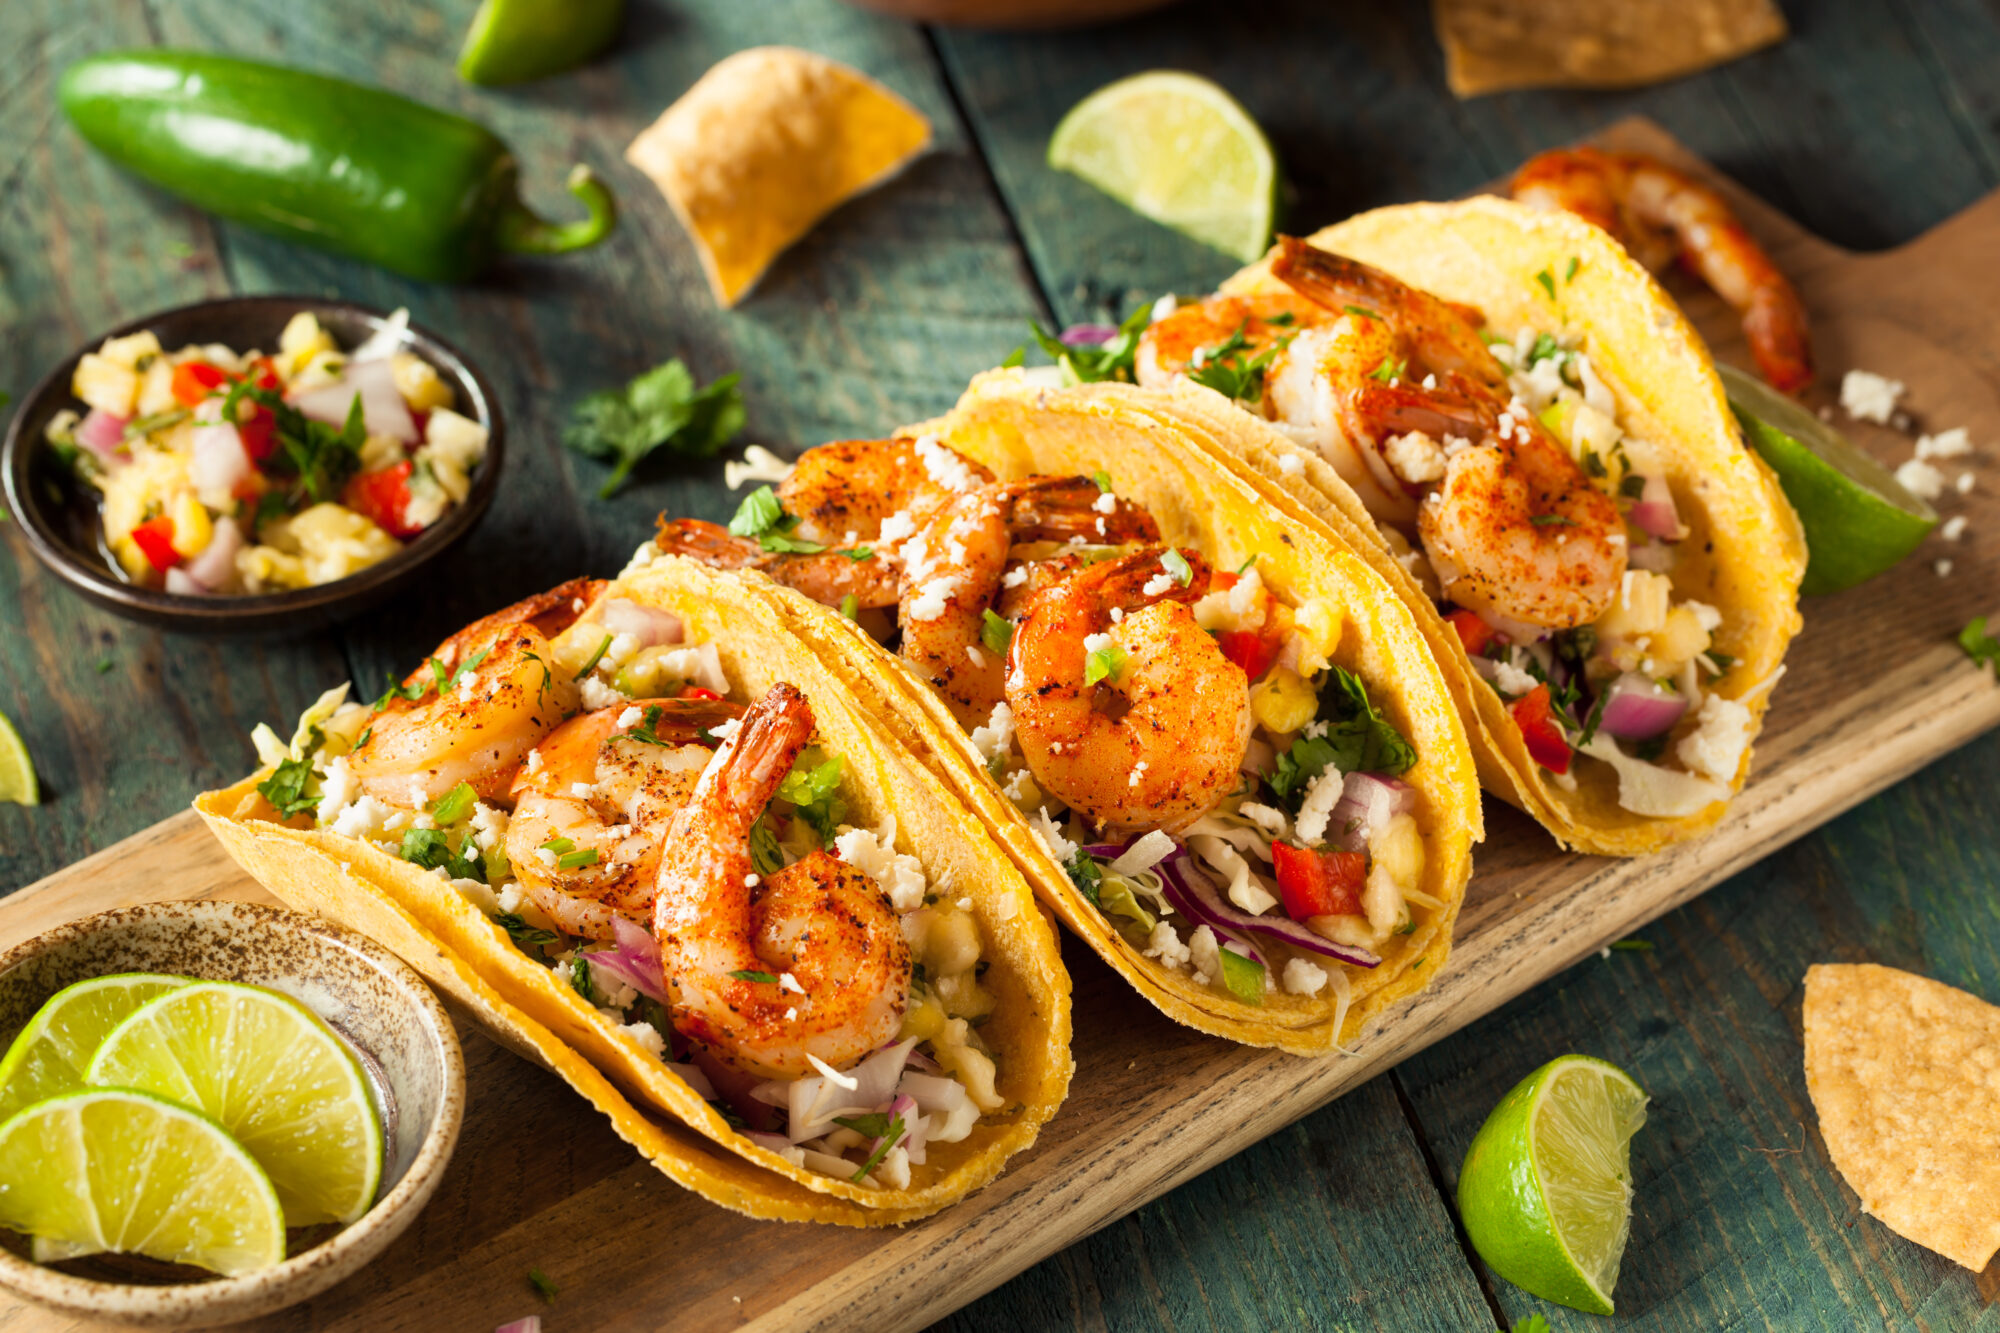 A colorful image of three shrimp tacos laid out on wooden board, along with various fresh taco fixings.